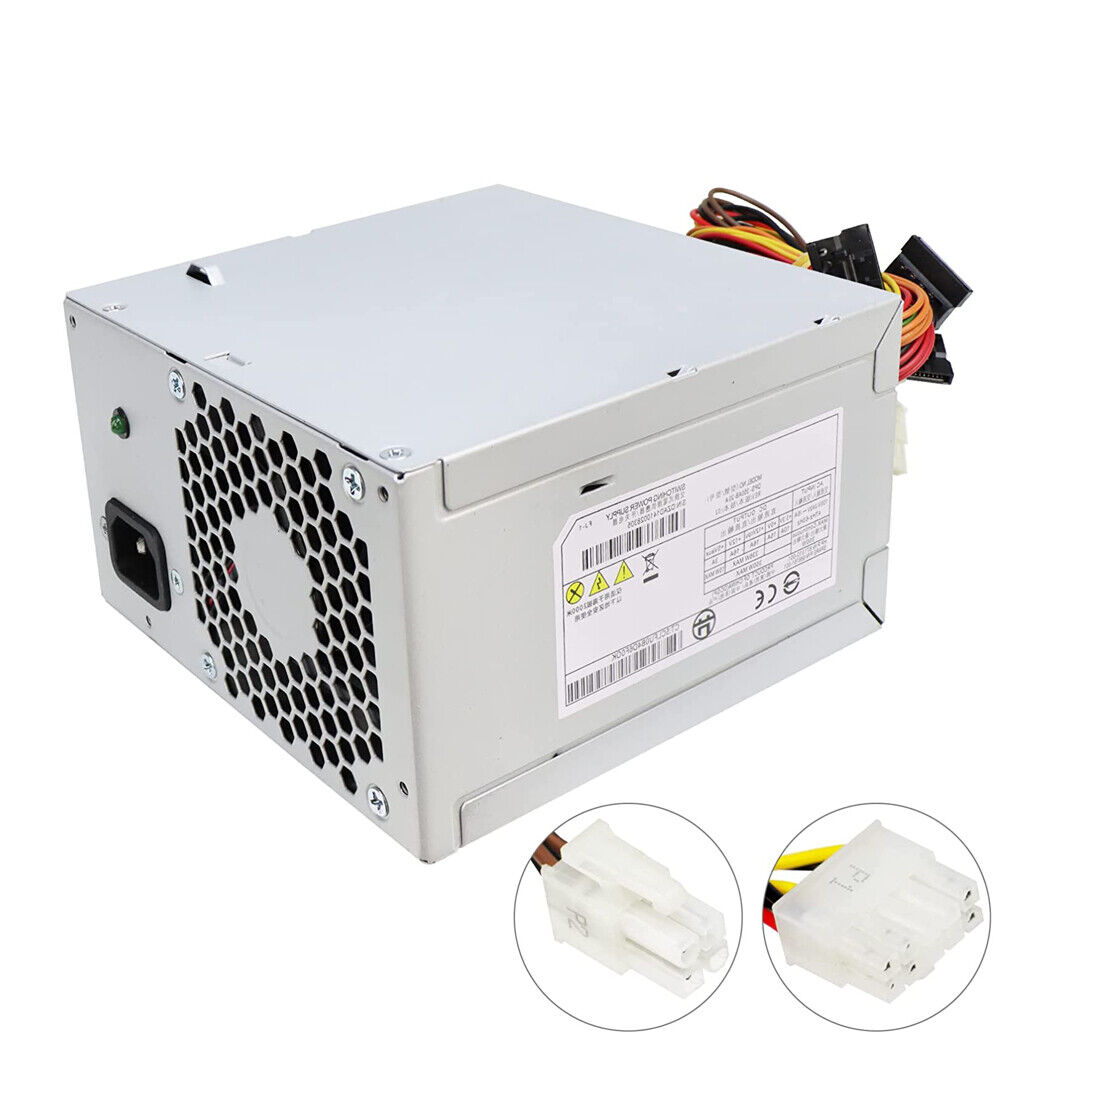 New DPS-350AB-20A 350W ATX Power Supply For HP ProLiant ML310e G8 671310-001